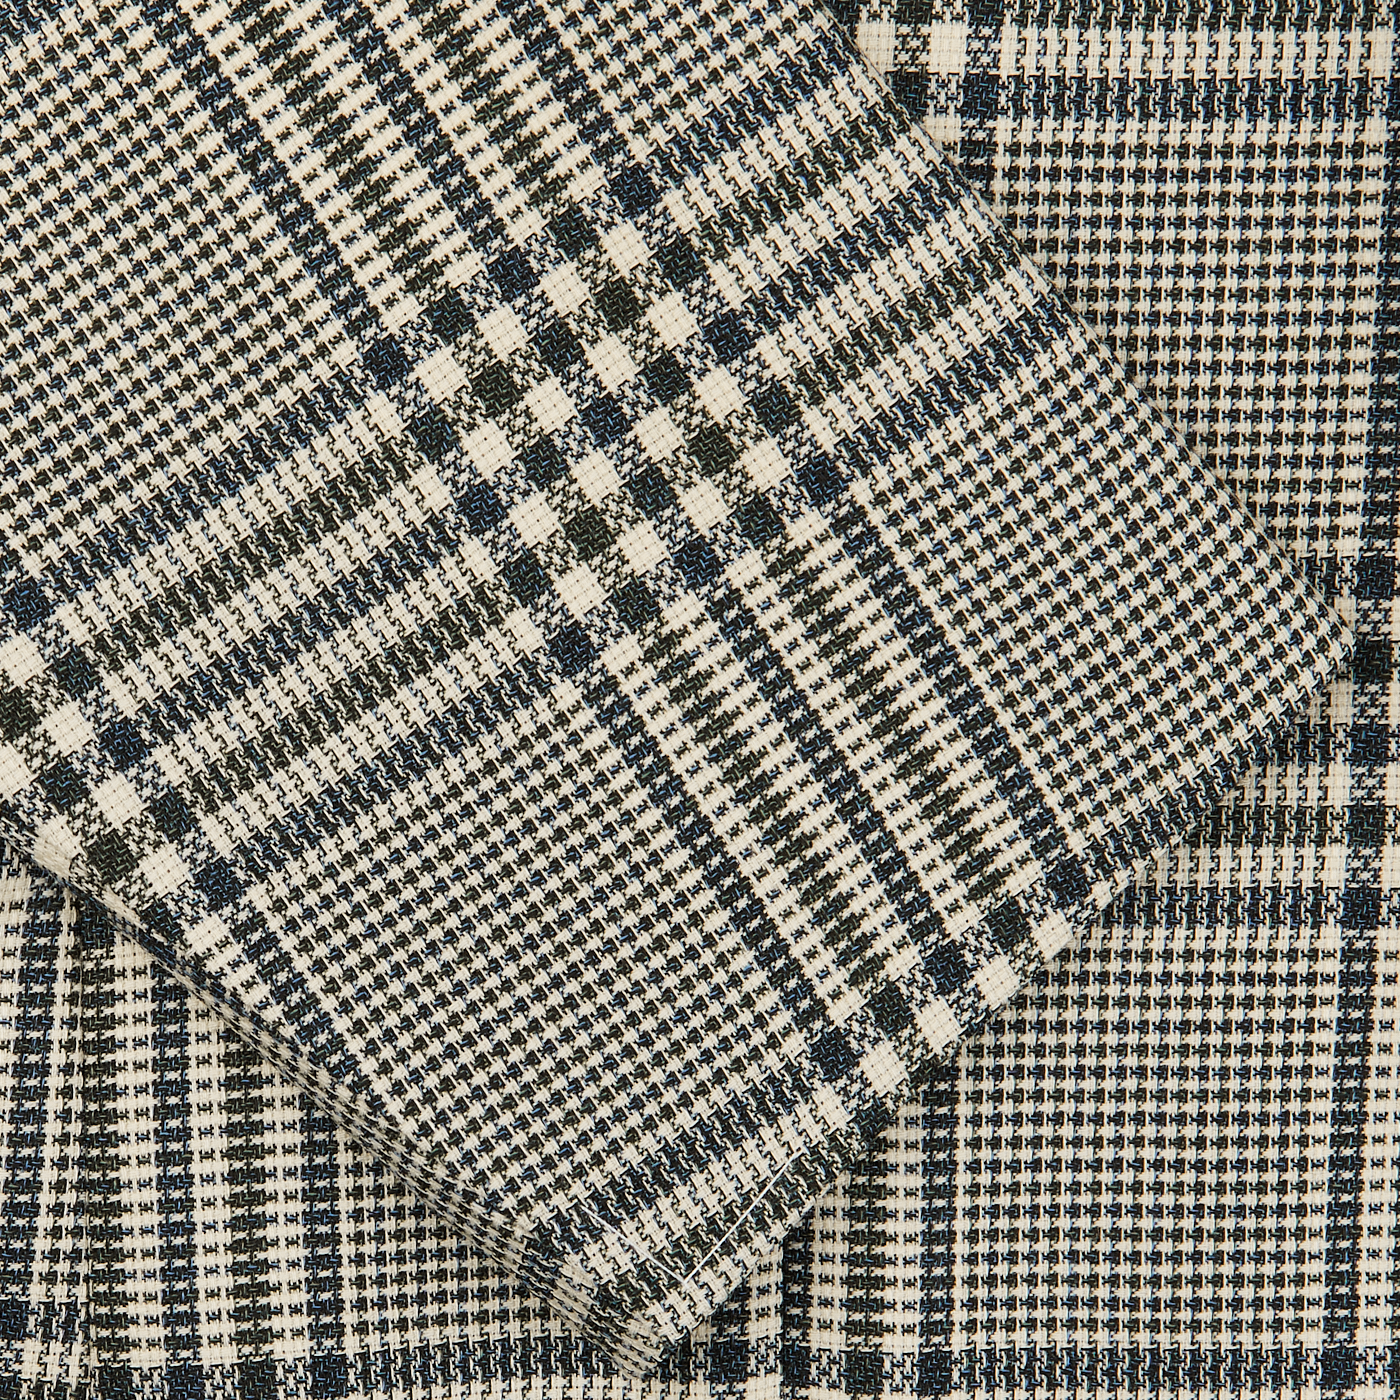 Close-up view of a folded Blue Green Glen Check Balloon Wool Blazer fabric by Ring Jacket with visible textures, ideal for a lightweight wool jacket.